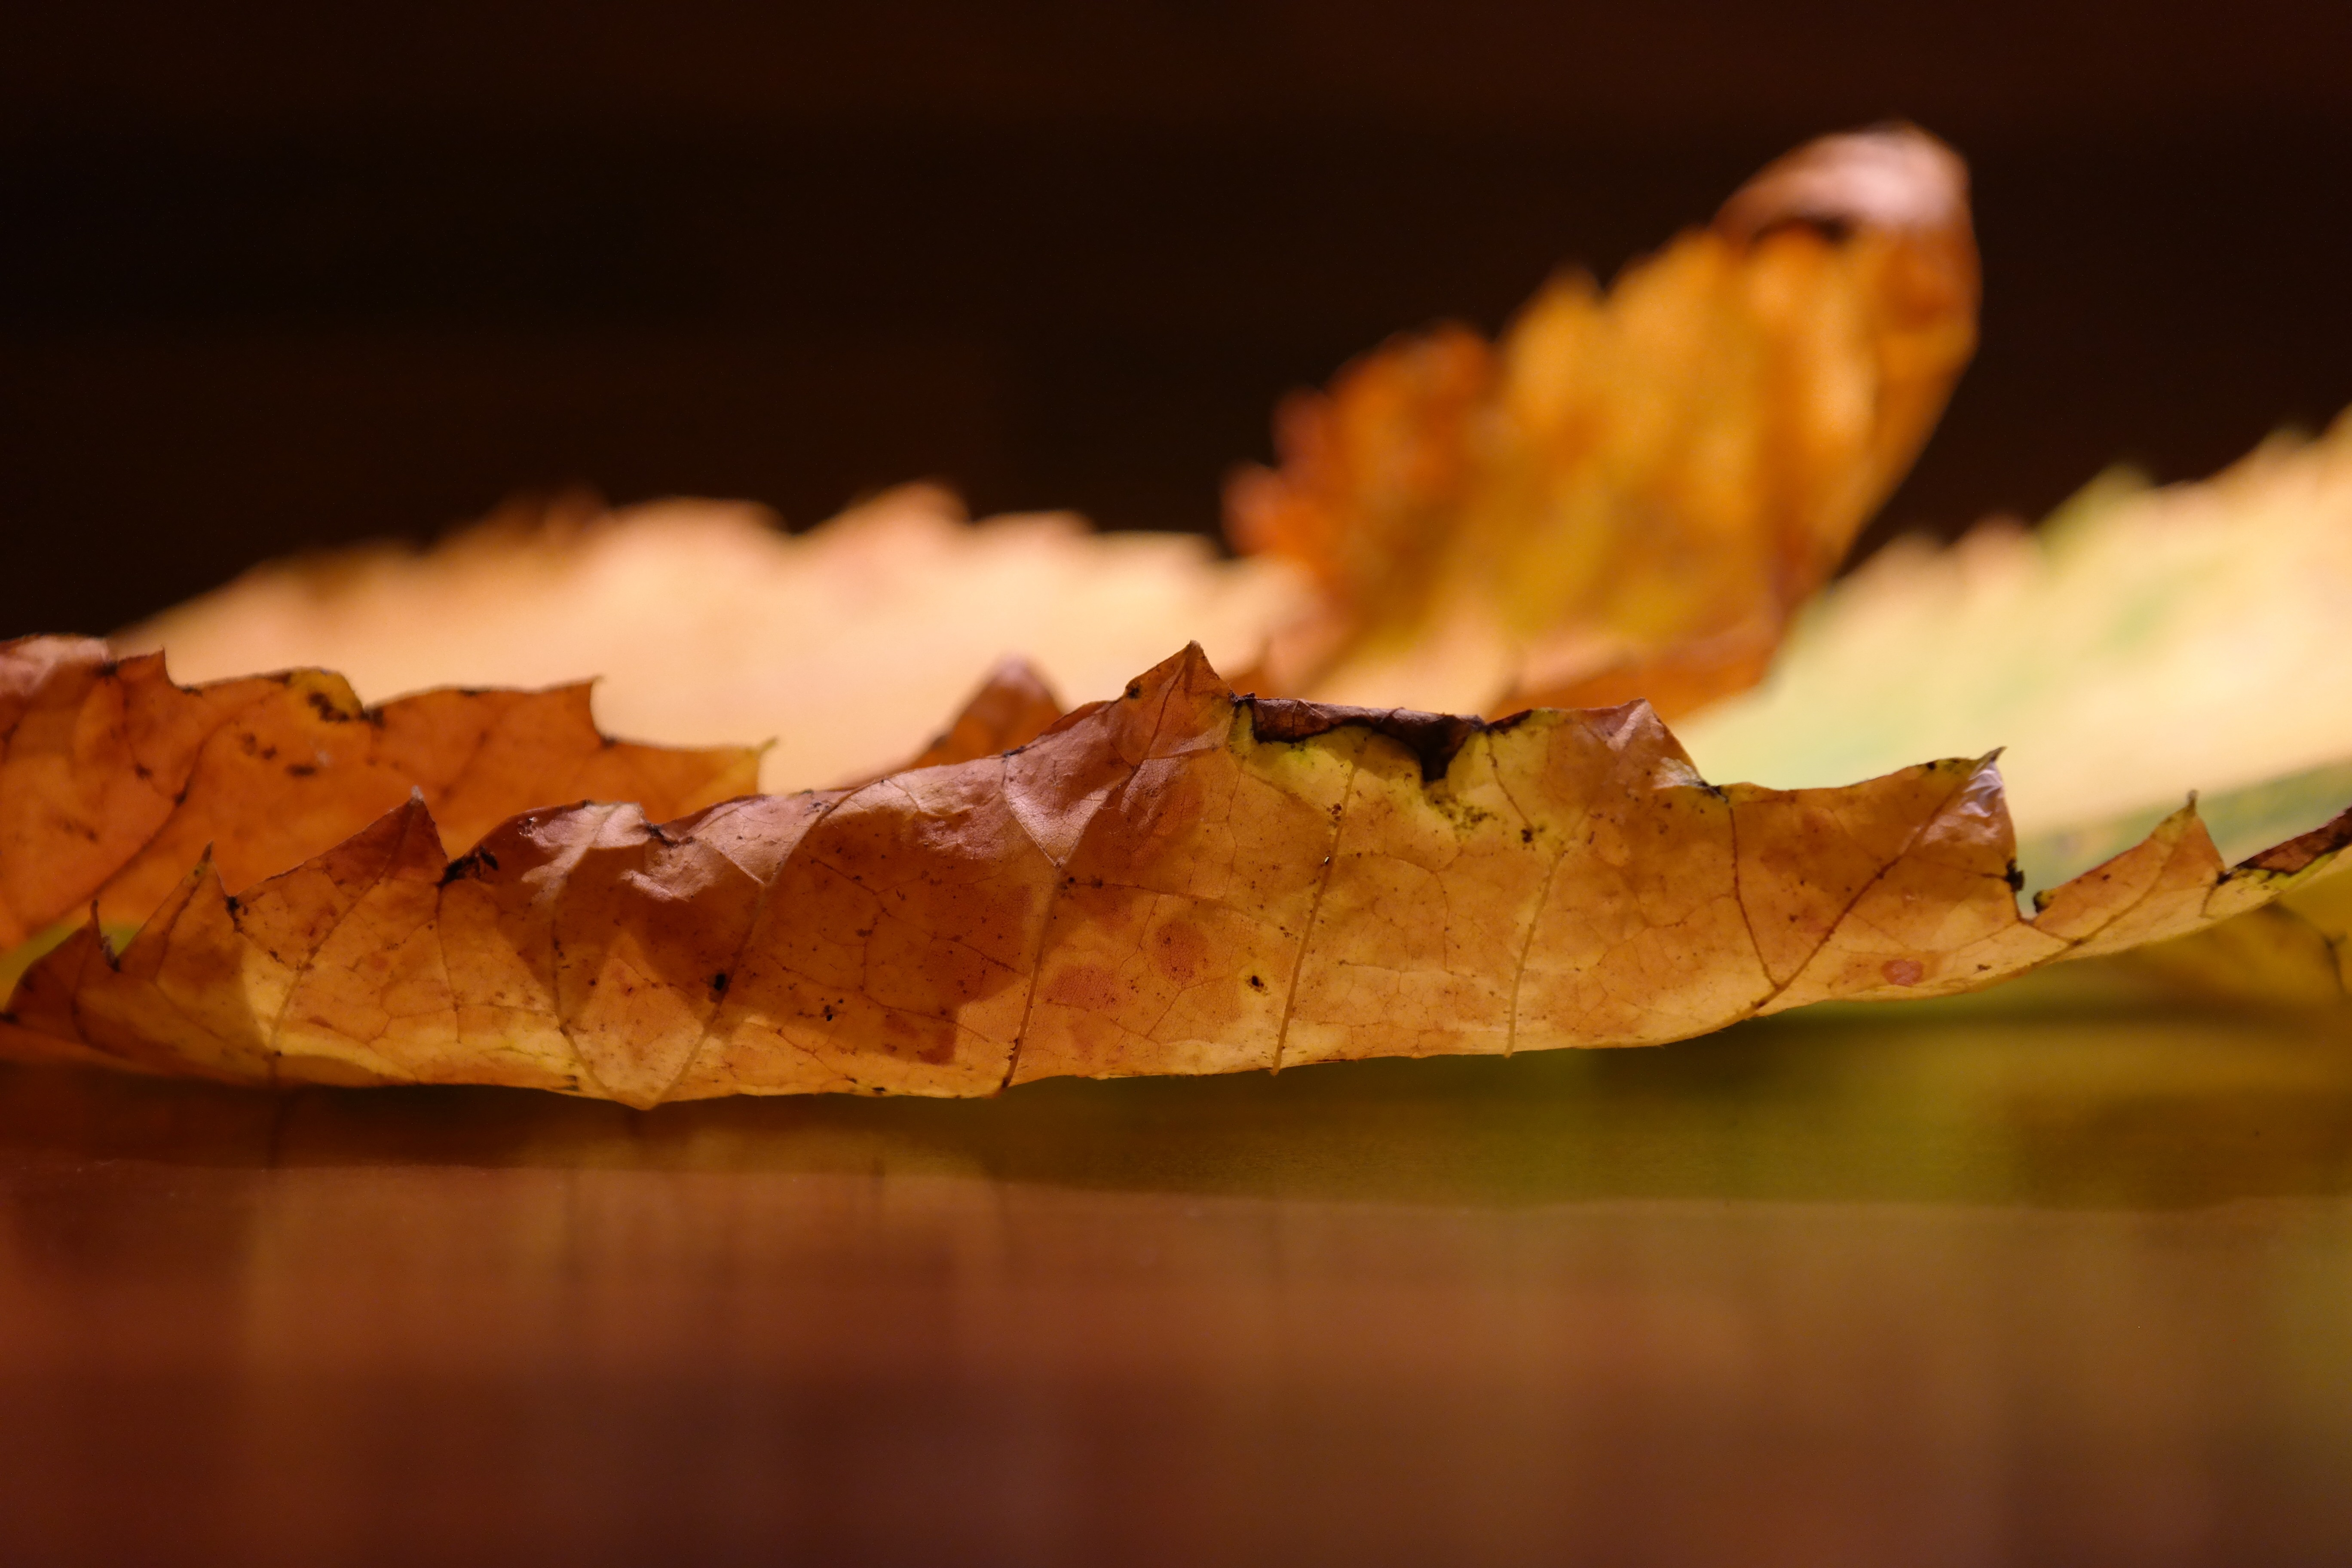 Elm Leaves, Mountain Elm, Edge, selective focus, food and drink